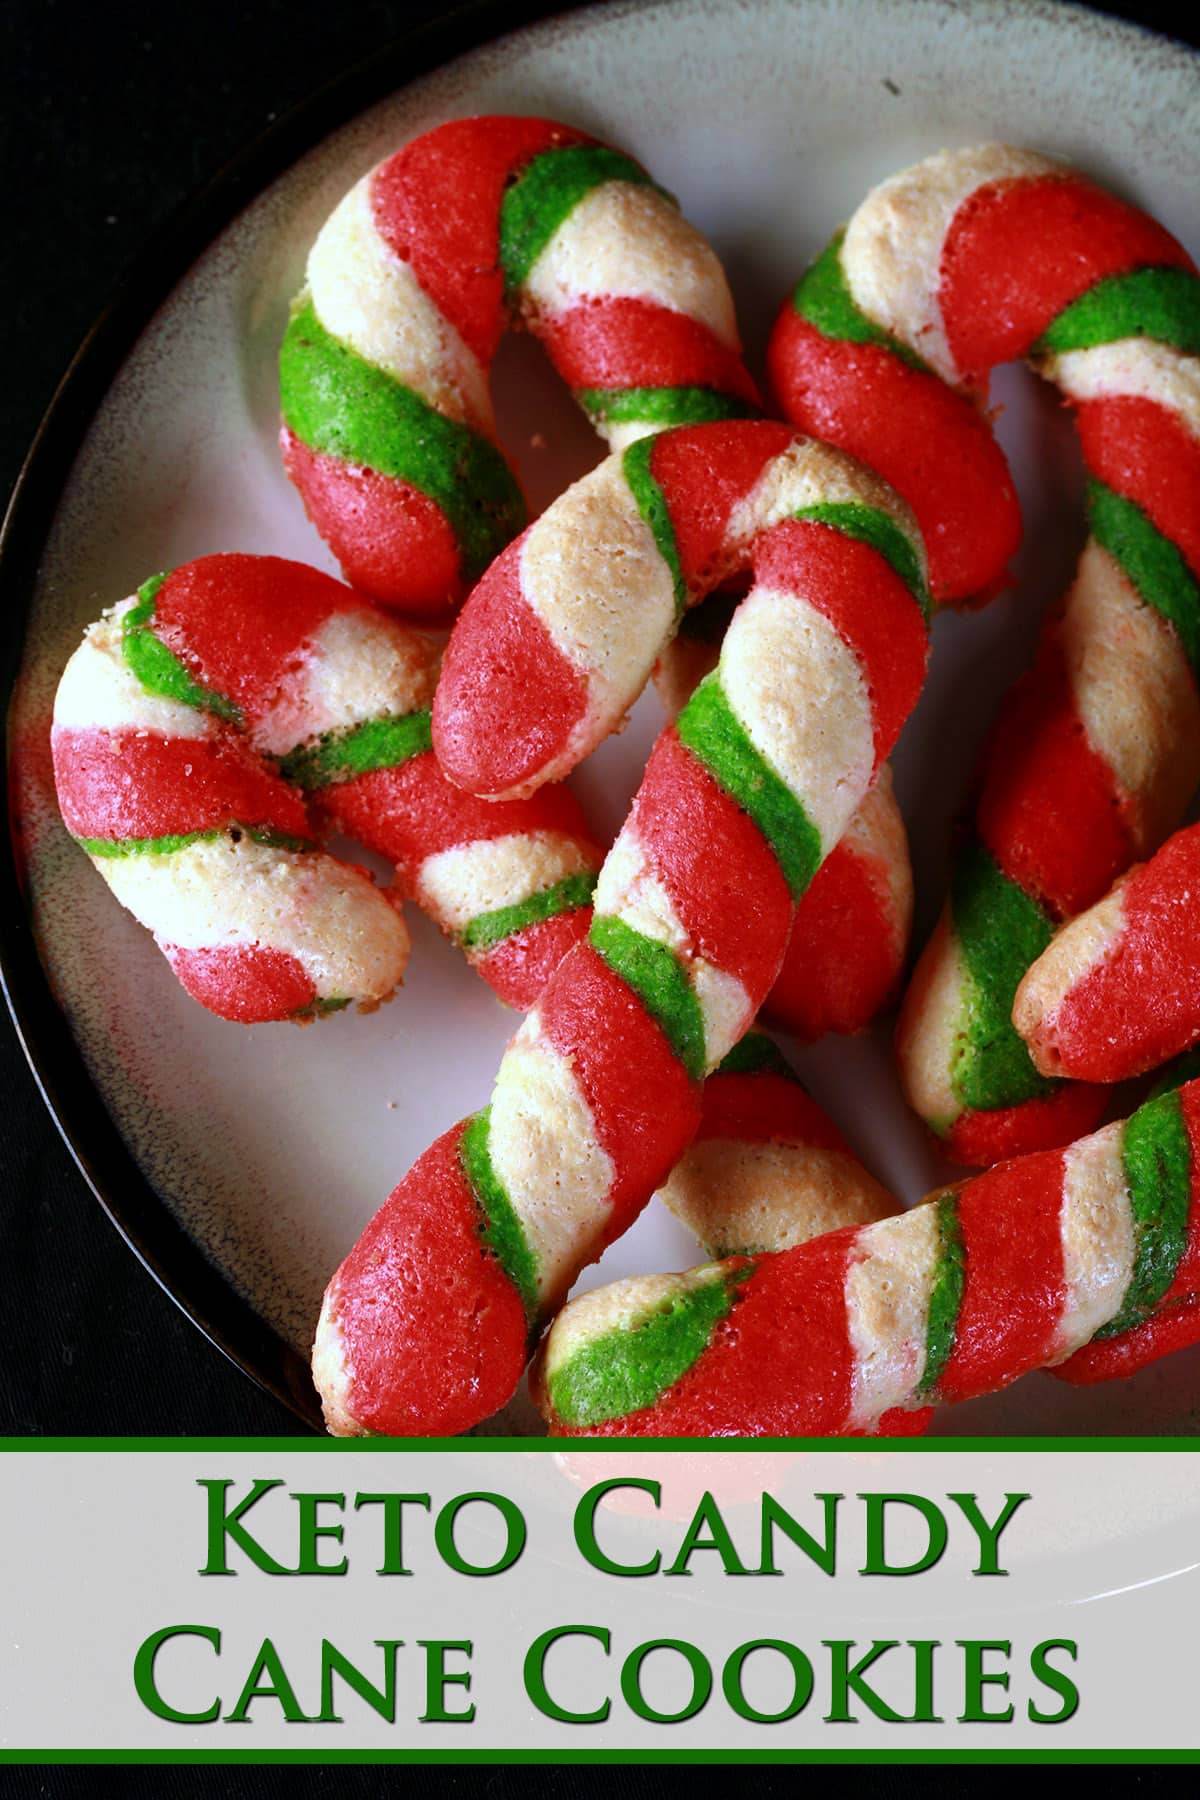 A plate of keto candy cane cookies.